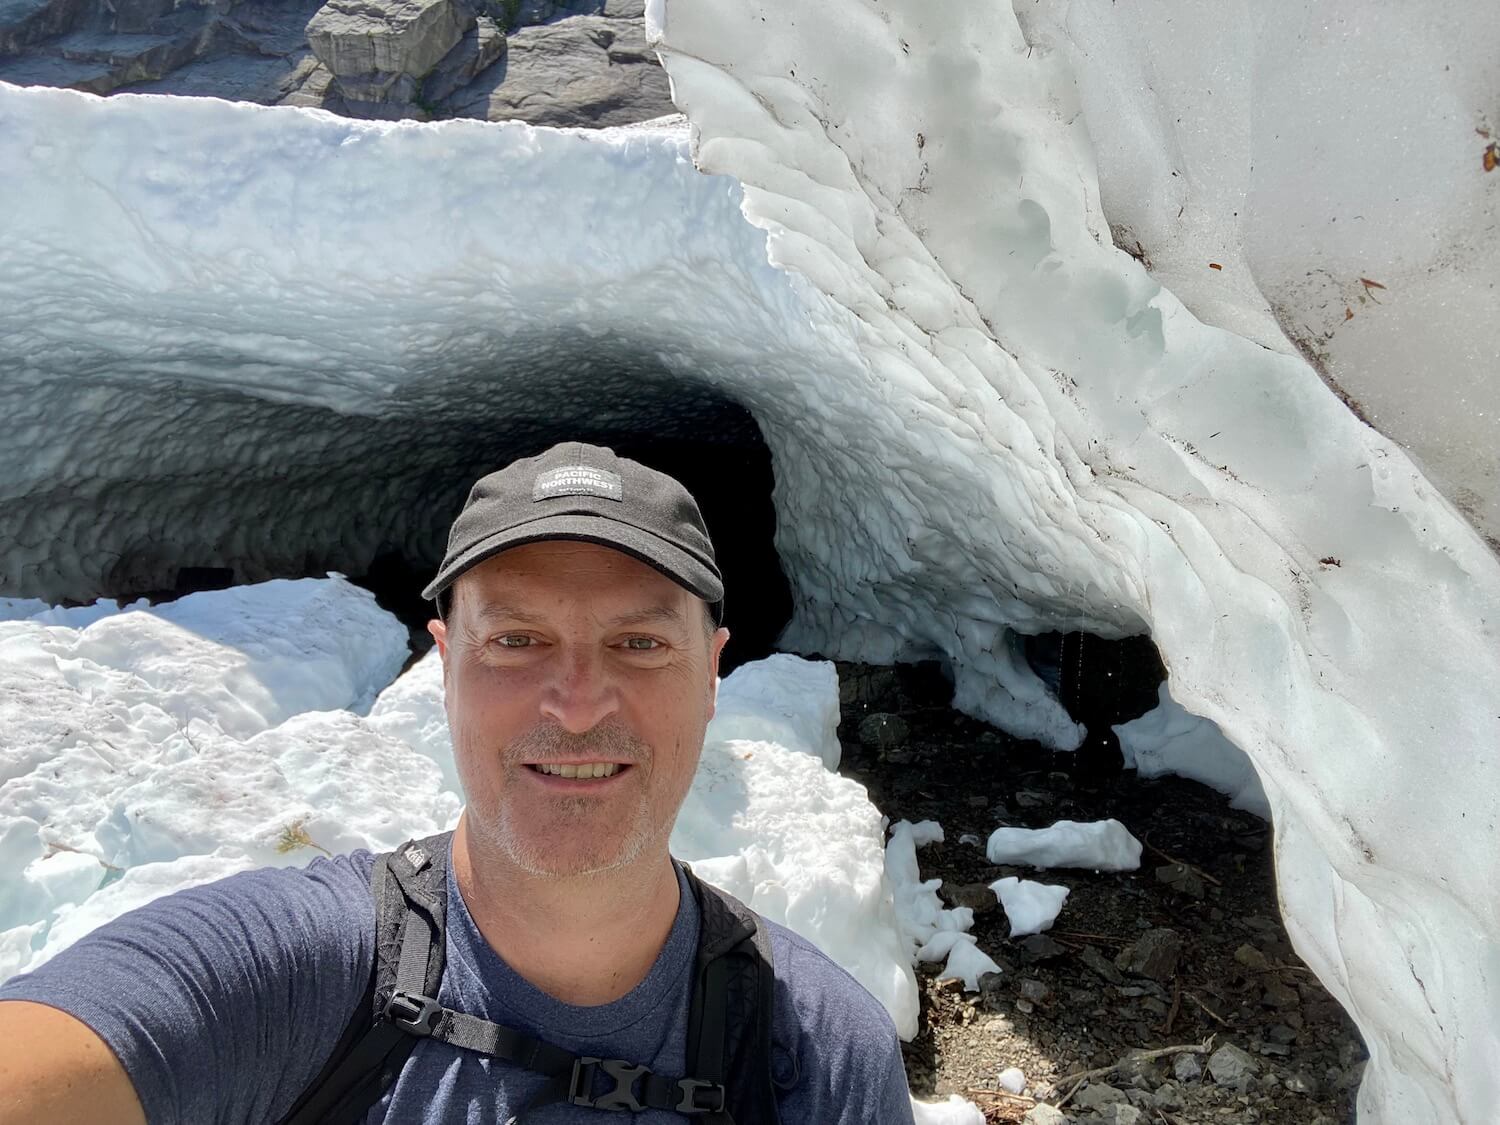 Matthew Kessi poses for this selfie in front of one of the caves at Big Four Ice Caves in the Mt. Baker Snoqualmie Wilderness Area. He's wearing a black cap and blue t-shirt and smiling toward the camera. The cave formations behind him are made from ice that is white with traces of dust and dirt from the rock below.